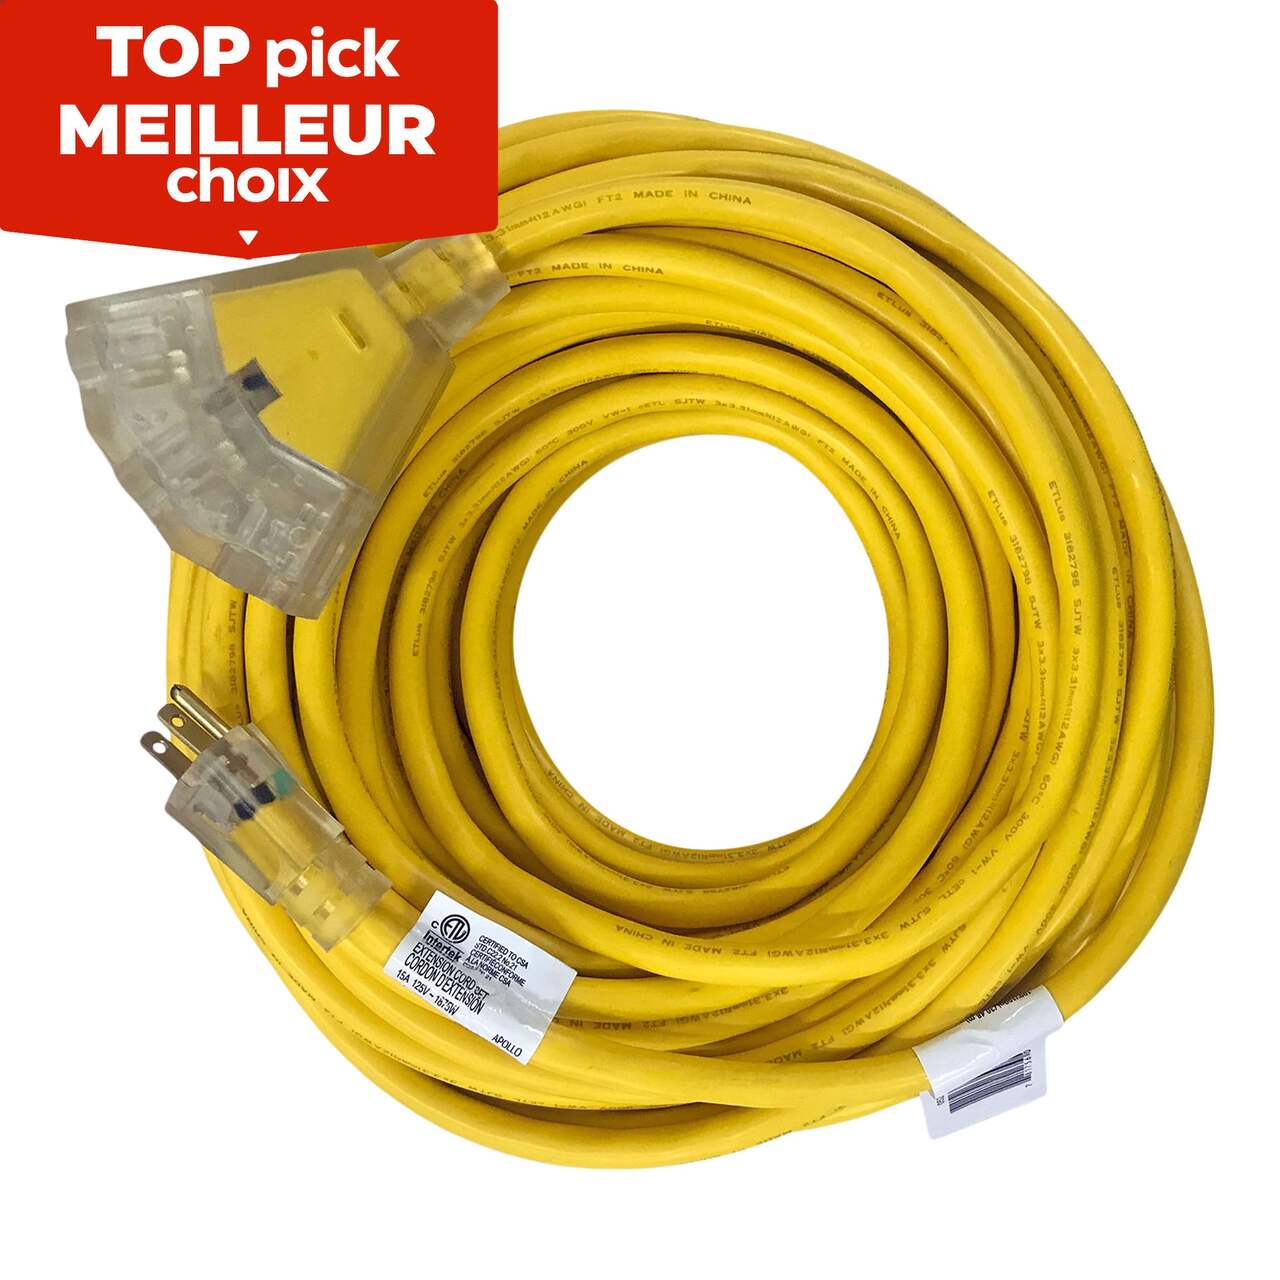 Mastercraft 12/3 Yellow Outdoor Extension Cord with 3 Grounded Outlets and  Lighted End